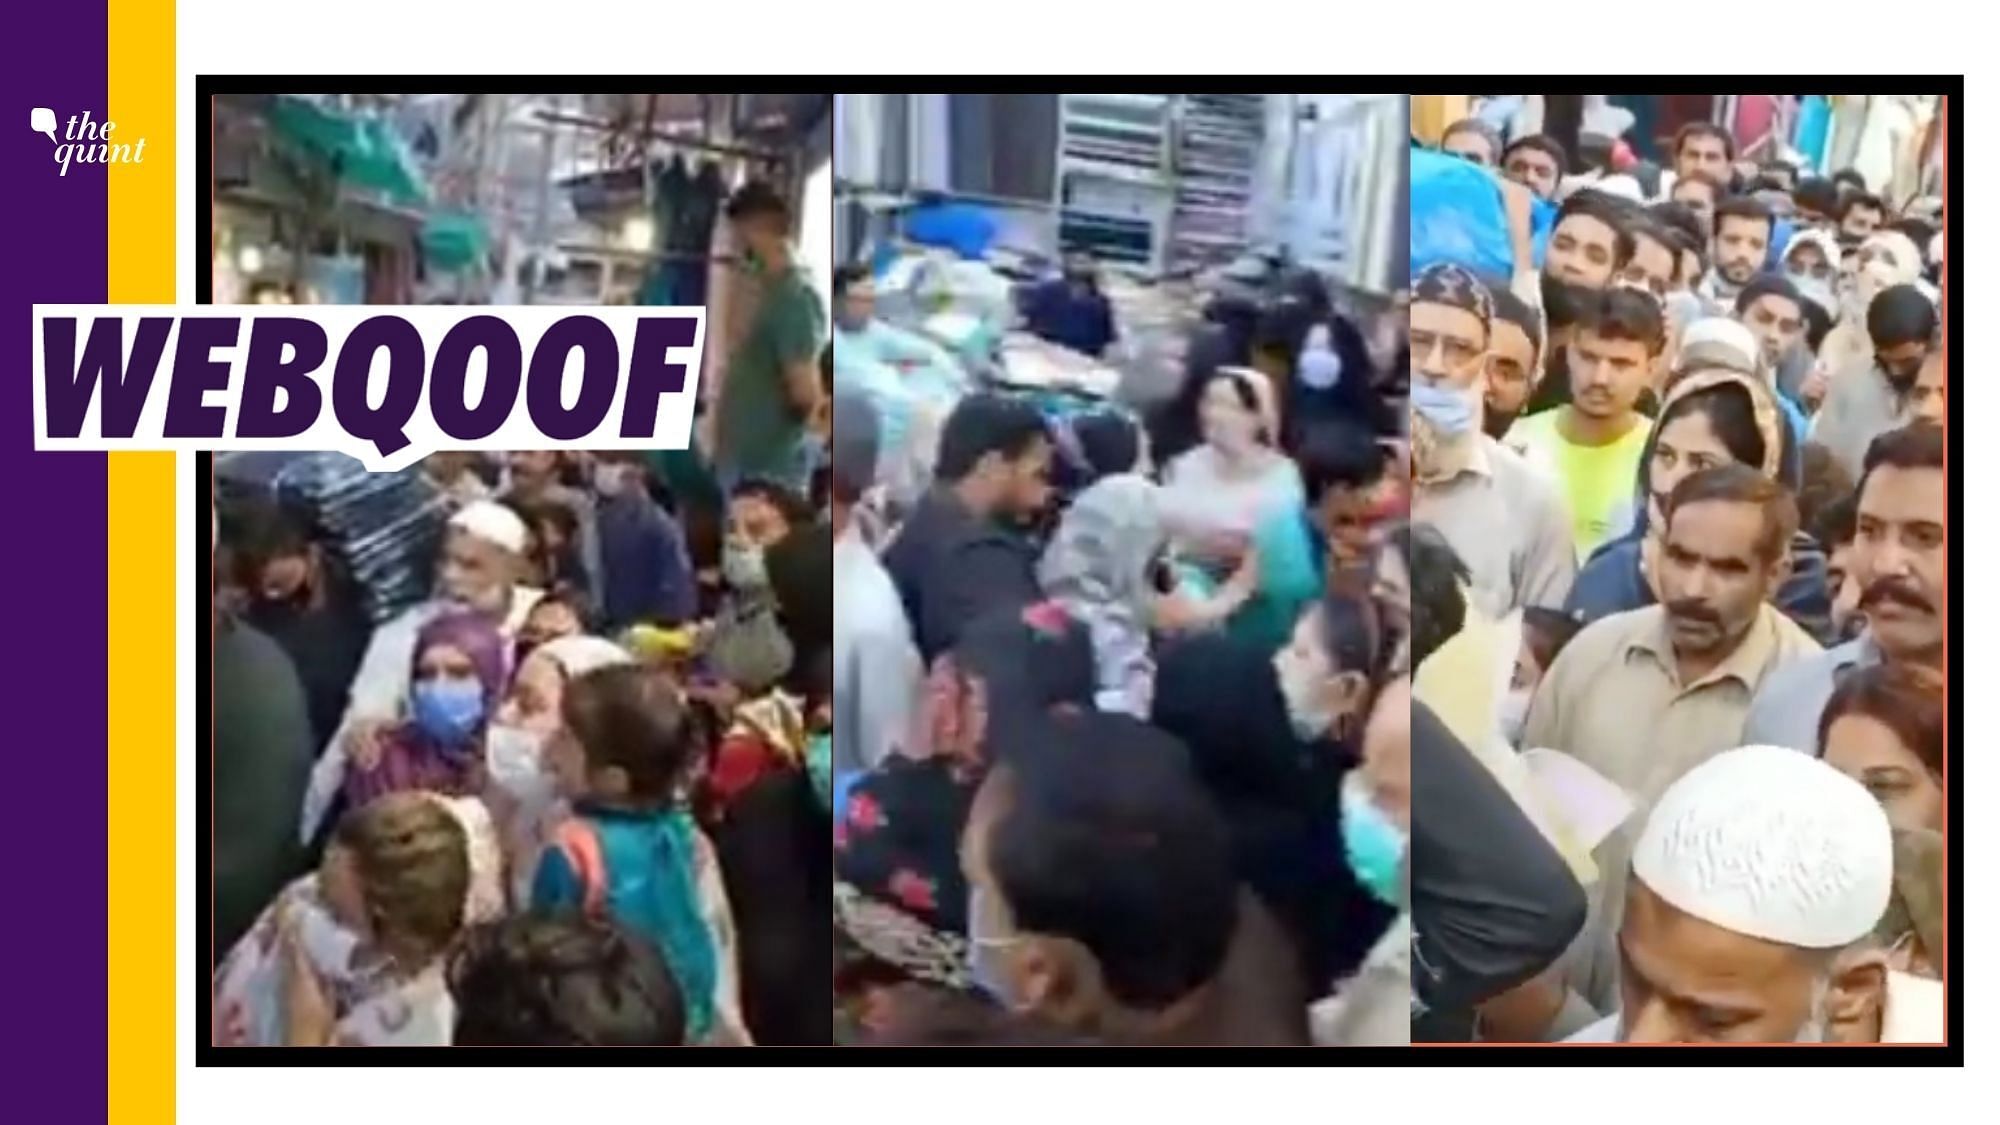 A video showing a crowded marketplace is doing the rounds with the false claim that it is from New Delhi’s Jafrabad area.